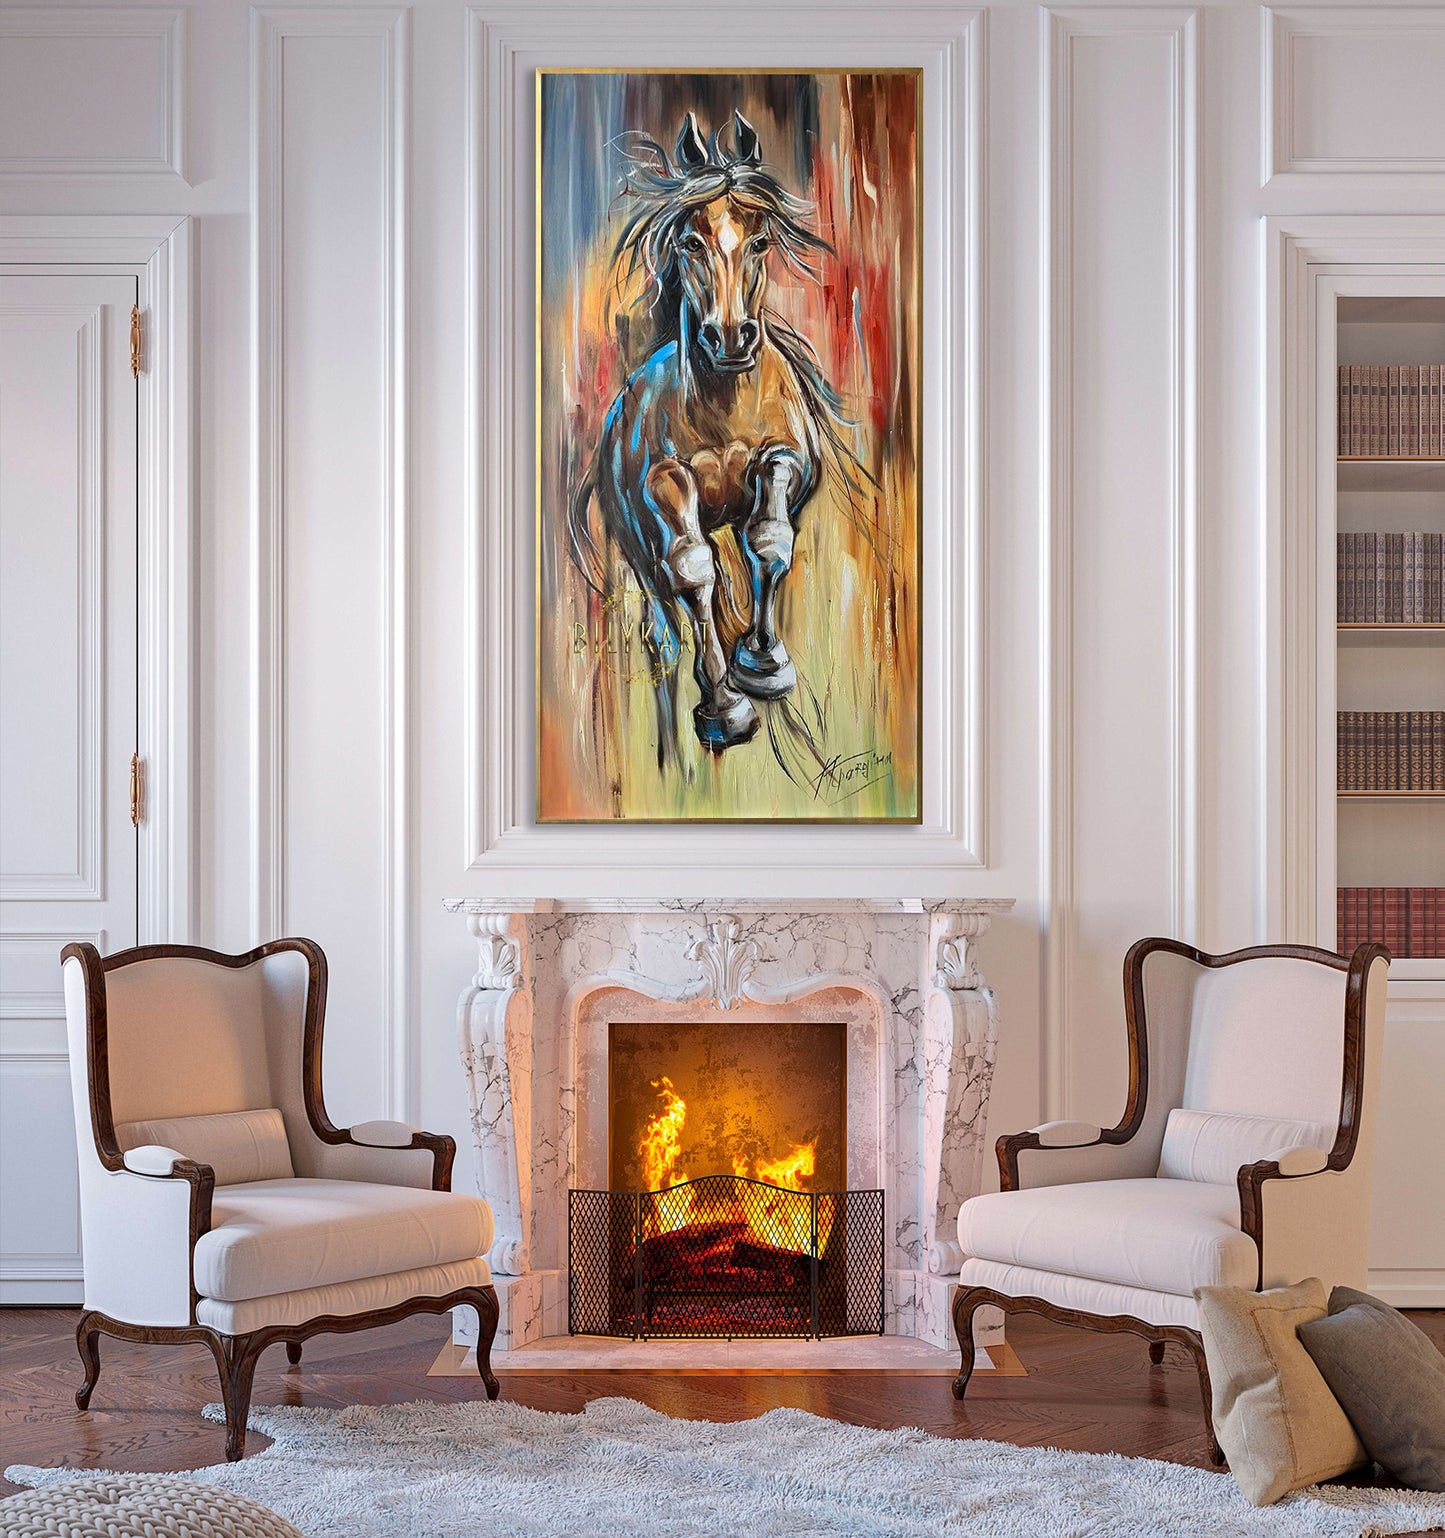 Extra Large Abstract Horse Oil painting on Canvas Running Horse Wall Decor Western Oil Paintings Horse Lover Gifts for Home